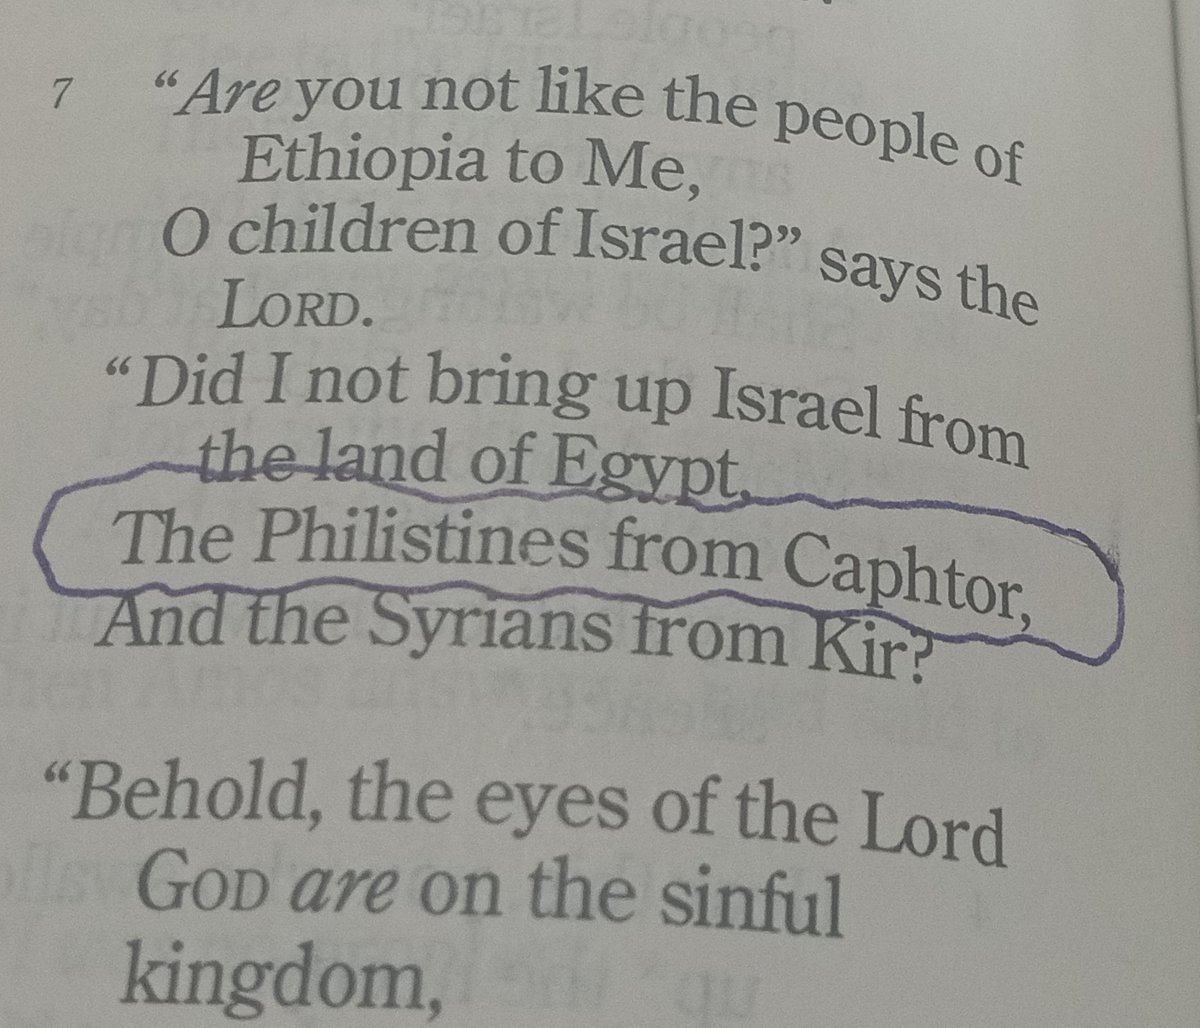 People ask how I know that the Philistines are from Caphtor.  The answer is simple.  The #HolyBible says so, plainly.